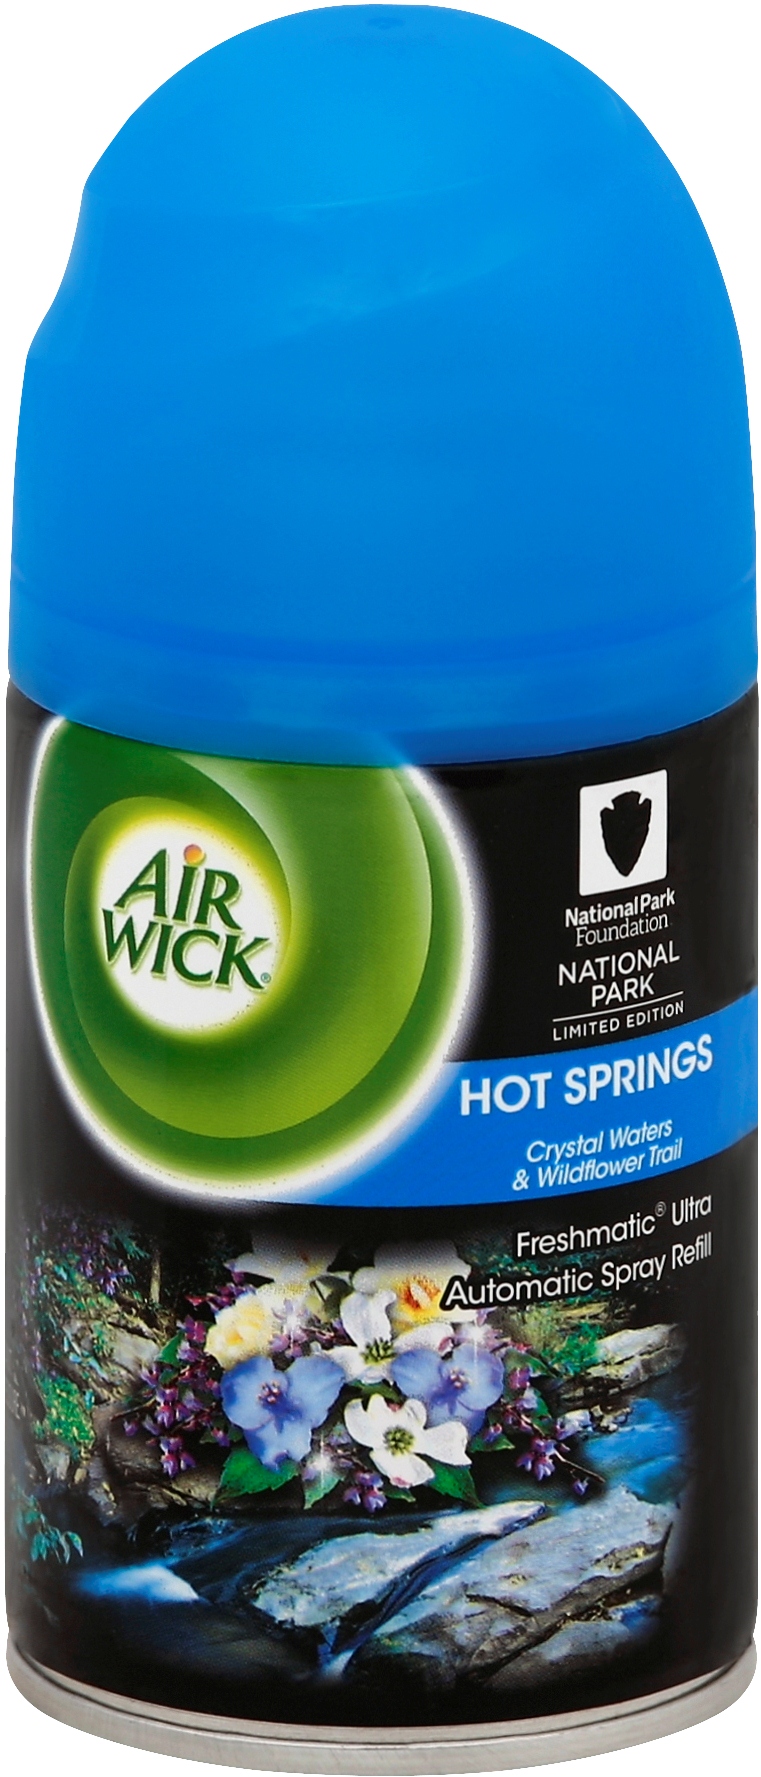 AIR WICK FRESHMATIC  Hot Springs Crystal Waters  Wildflower Trail Discontinued